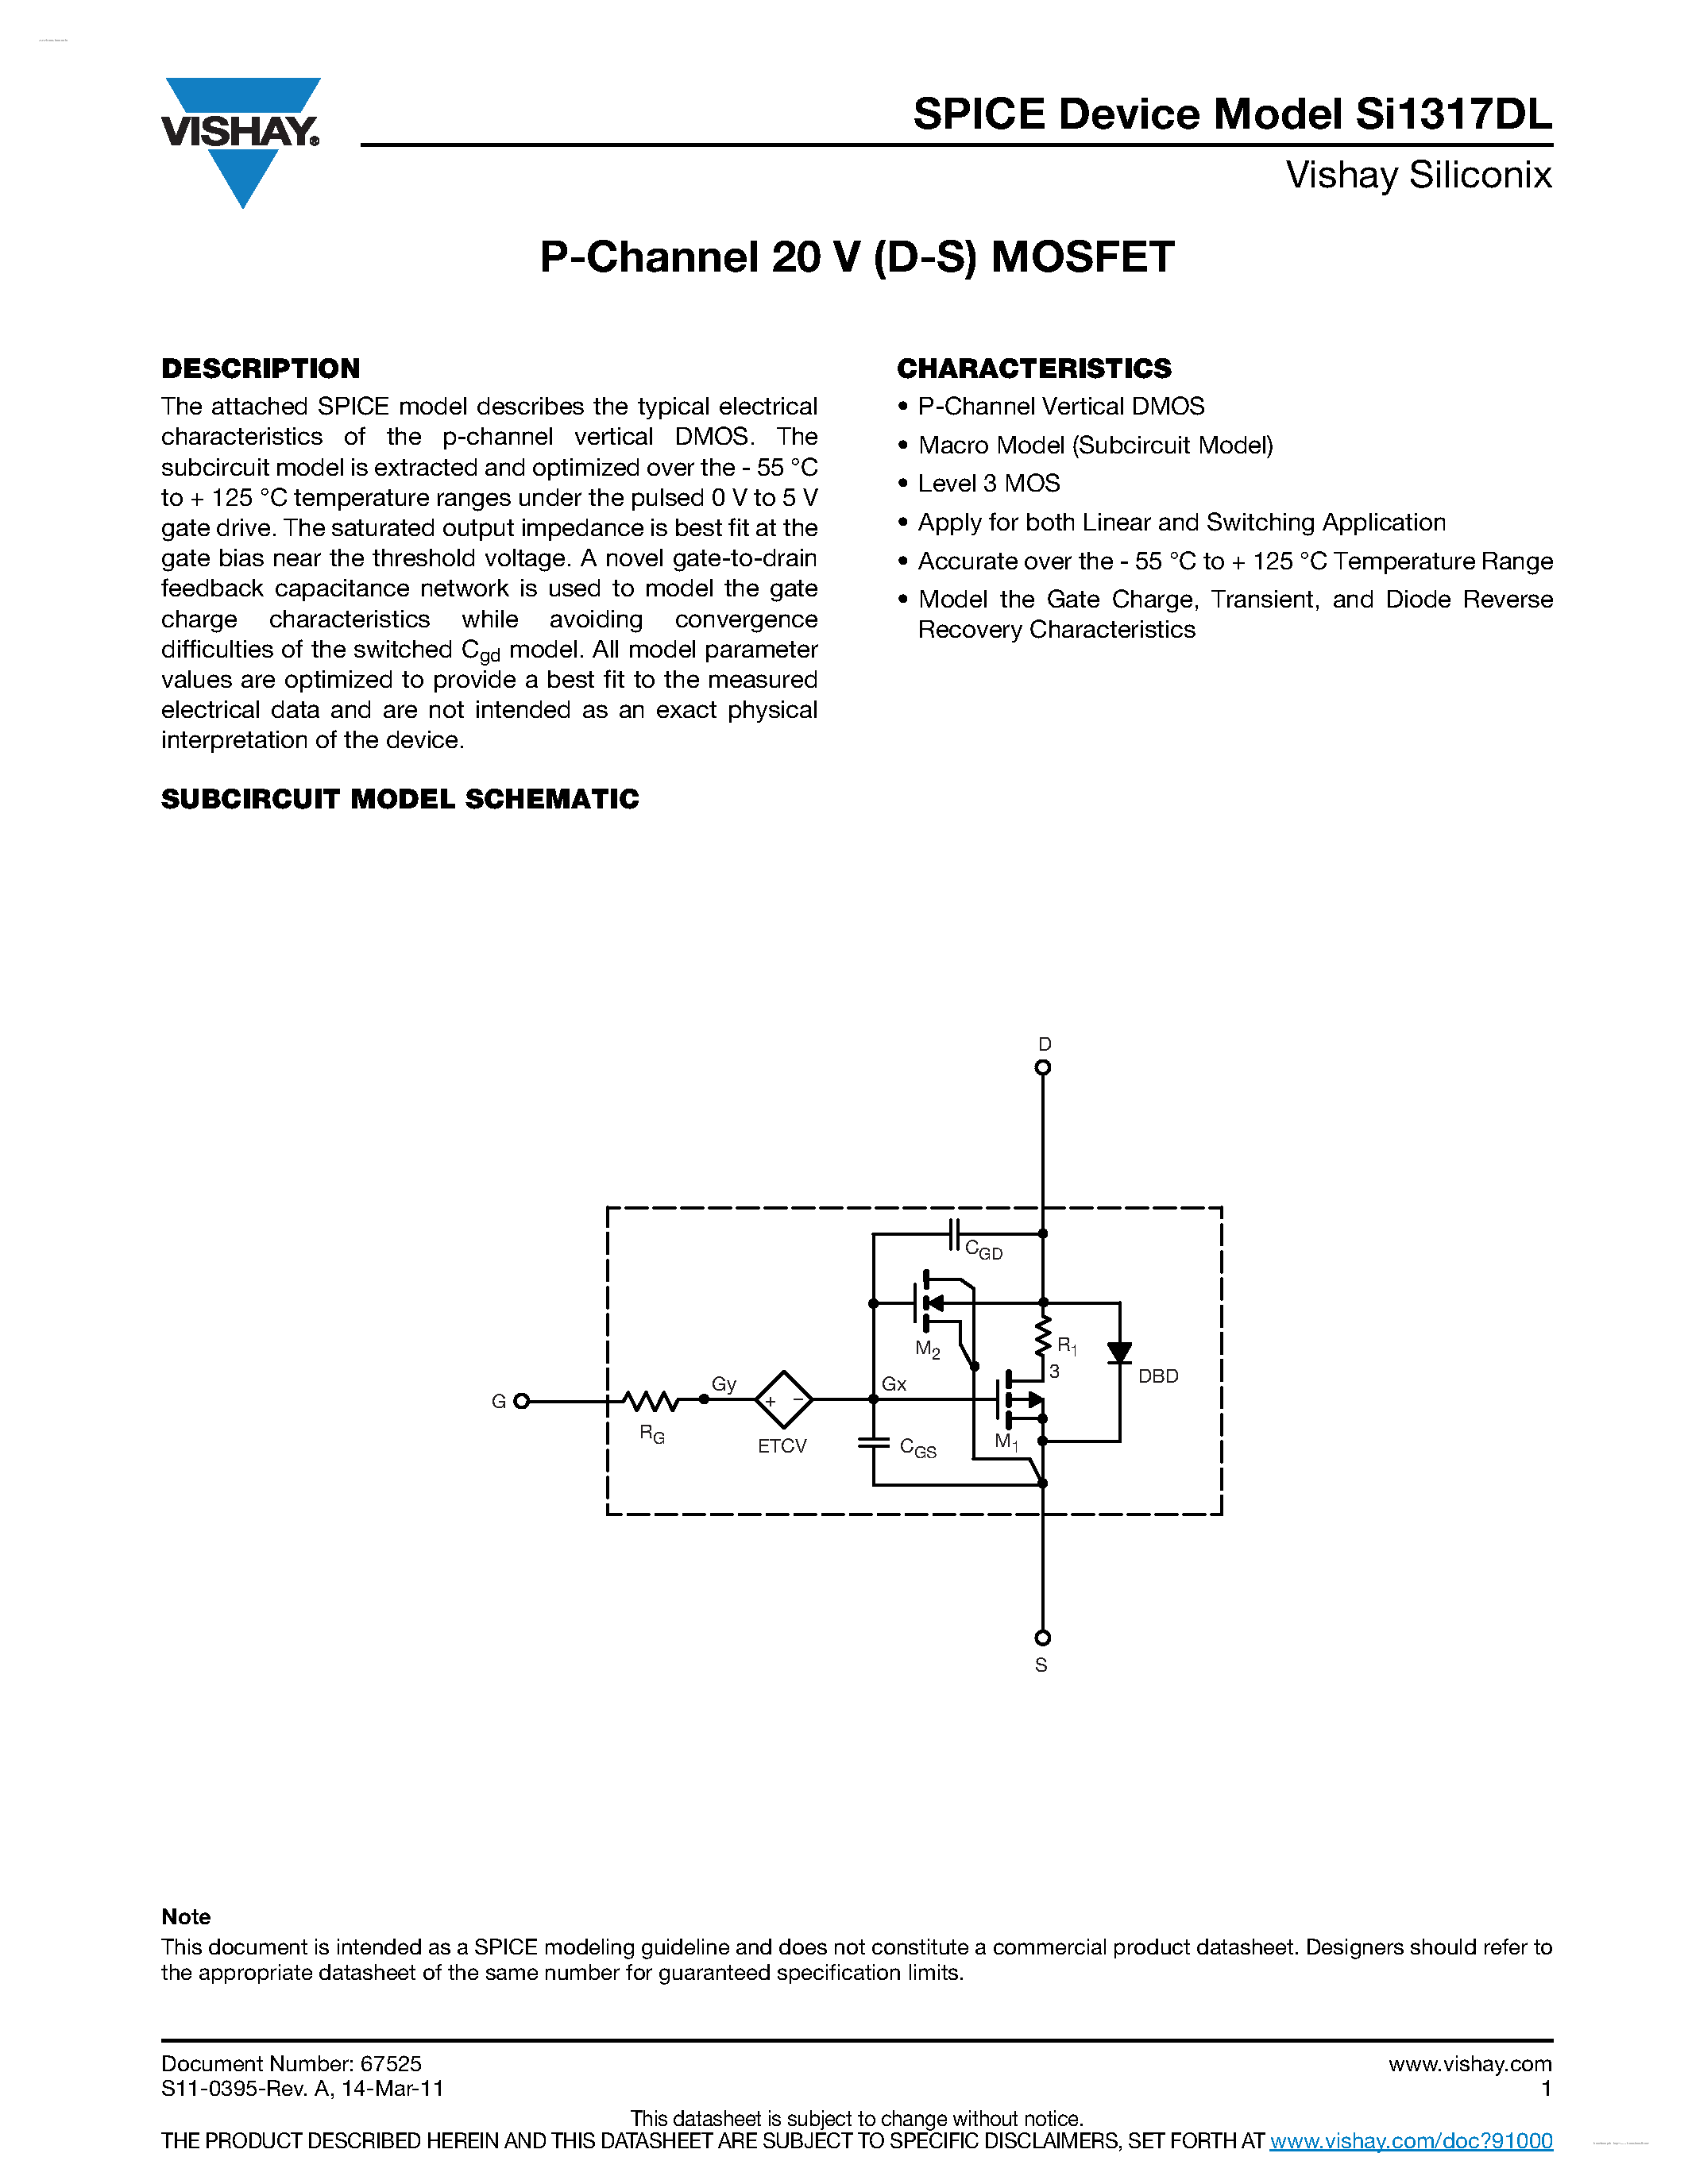 Datasheet SI1317DL - P-Channel 20 V (D-S) MOSFET page 1